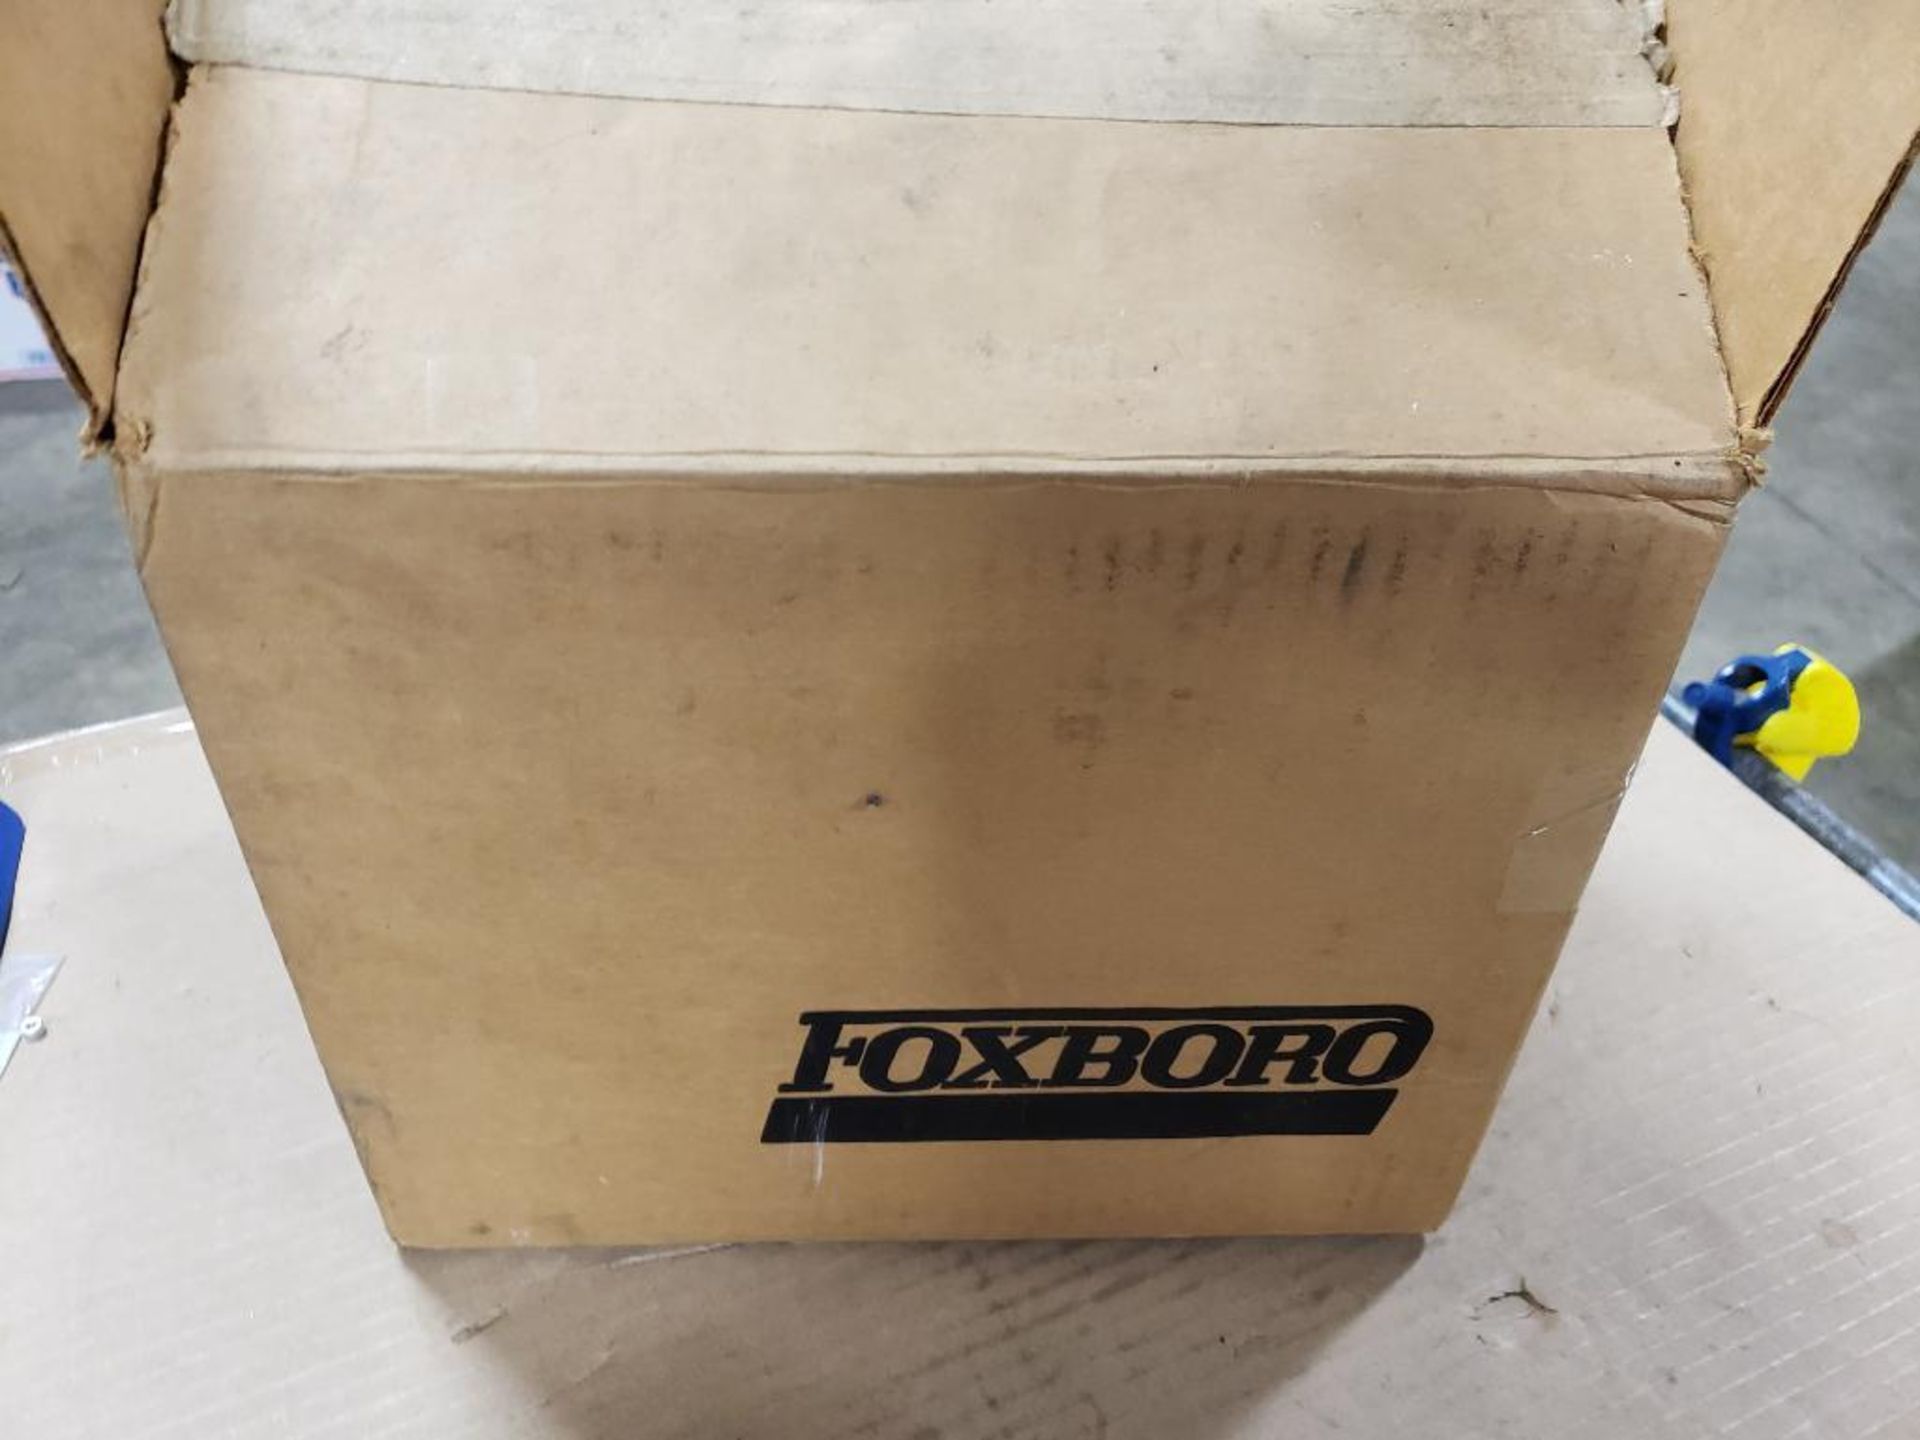 Foxboro 821GM-IK1NH2 Electronic Transmitter. Pressure switch. New in box. - Image 2 of 4